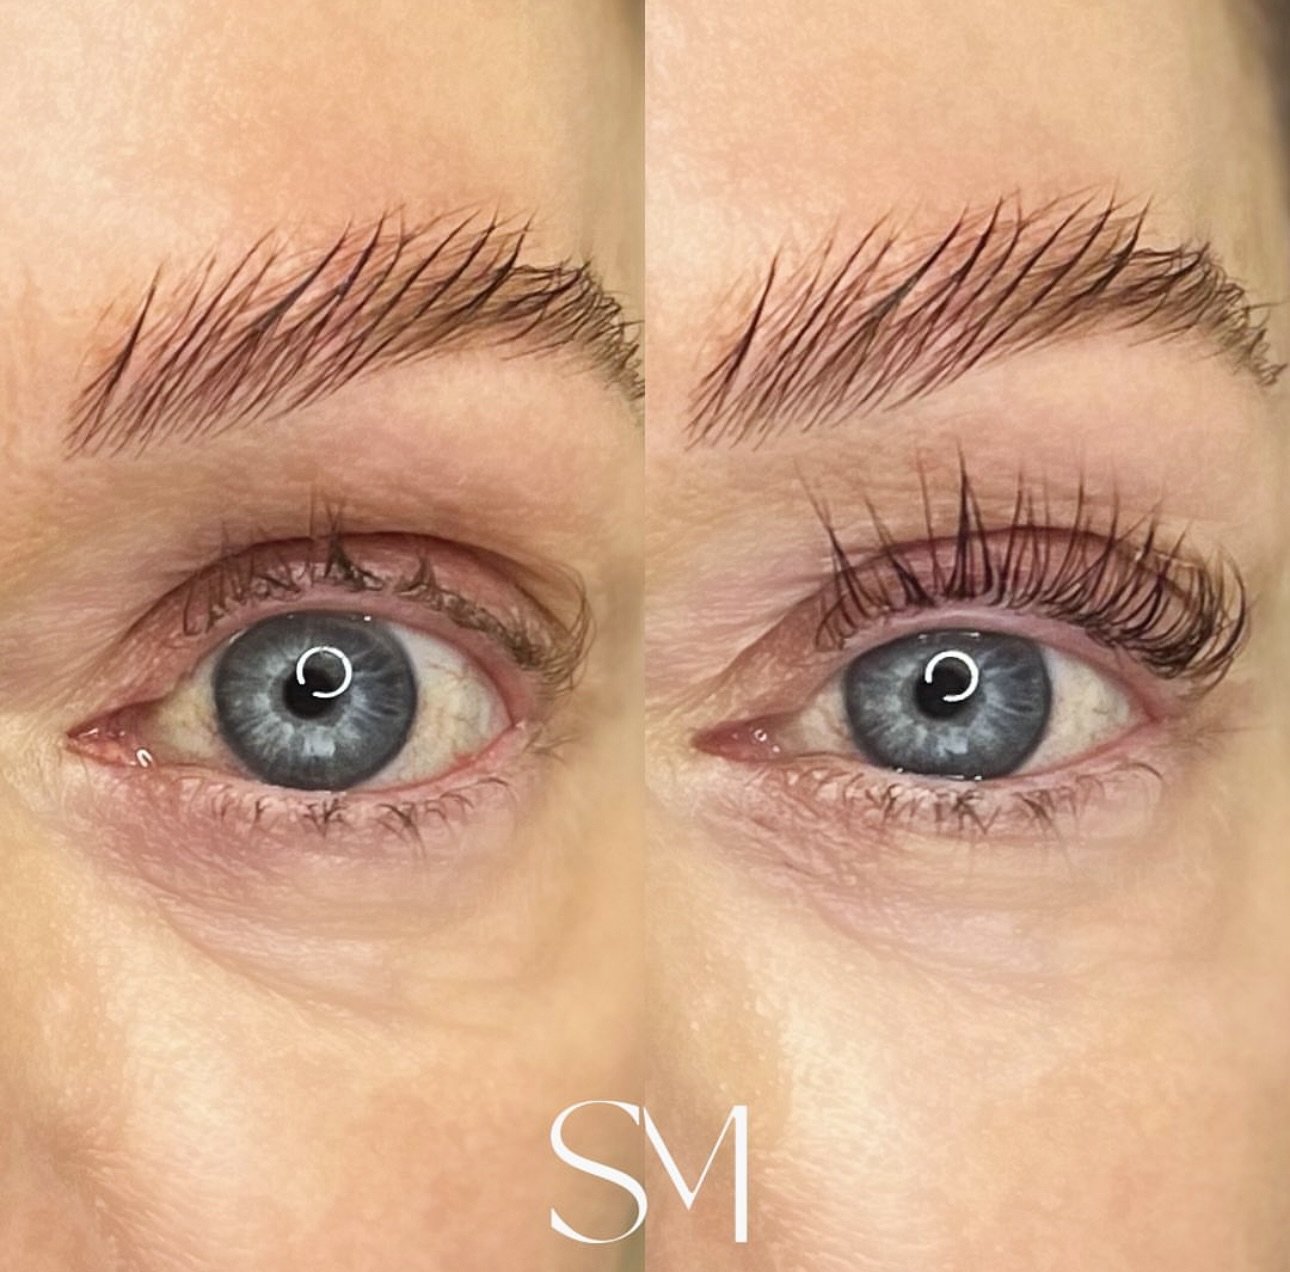 ✨LASH LIFT + TINT✨ 

Book your appointment with @jenny_warren_aesthetics today!